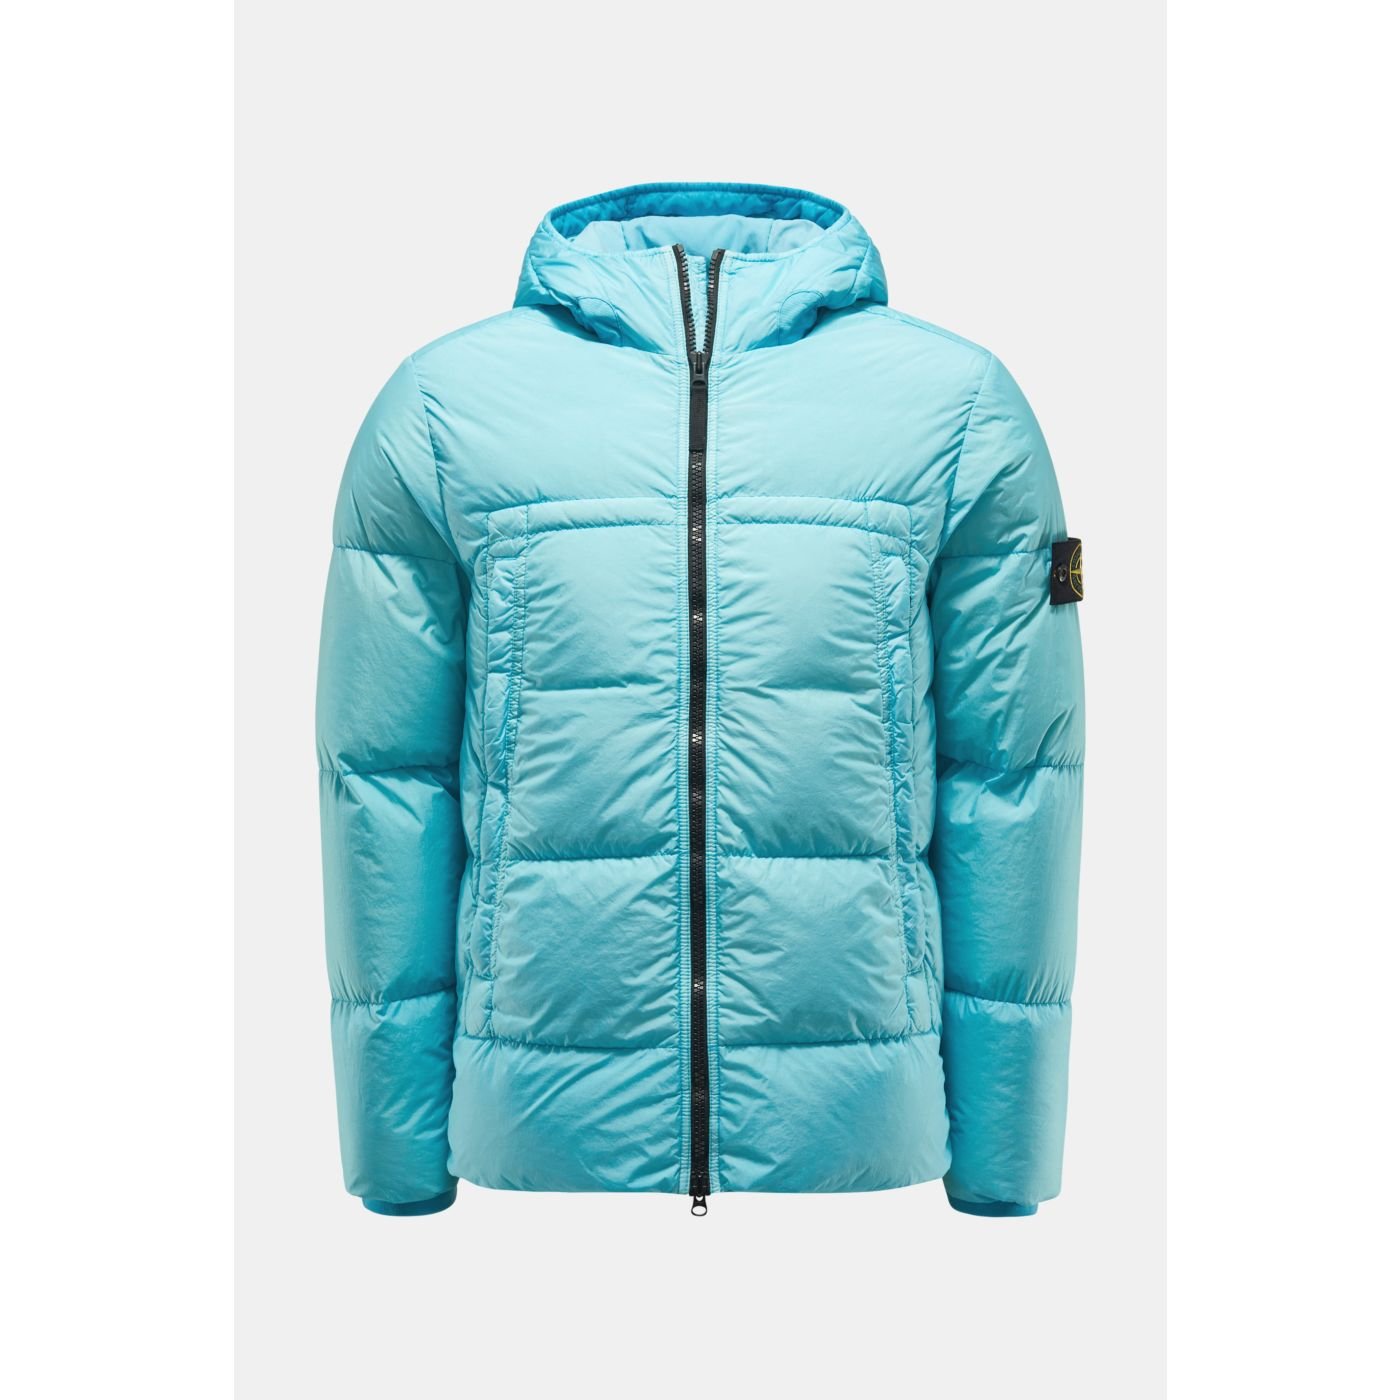 STONE ISLAND down jacket 'Garment Dyed Crinkle Reps NY Down' turquoise ...